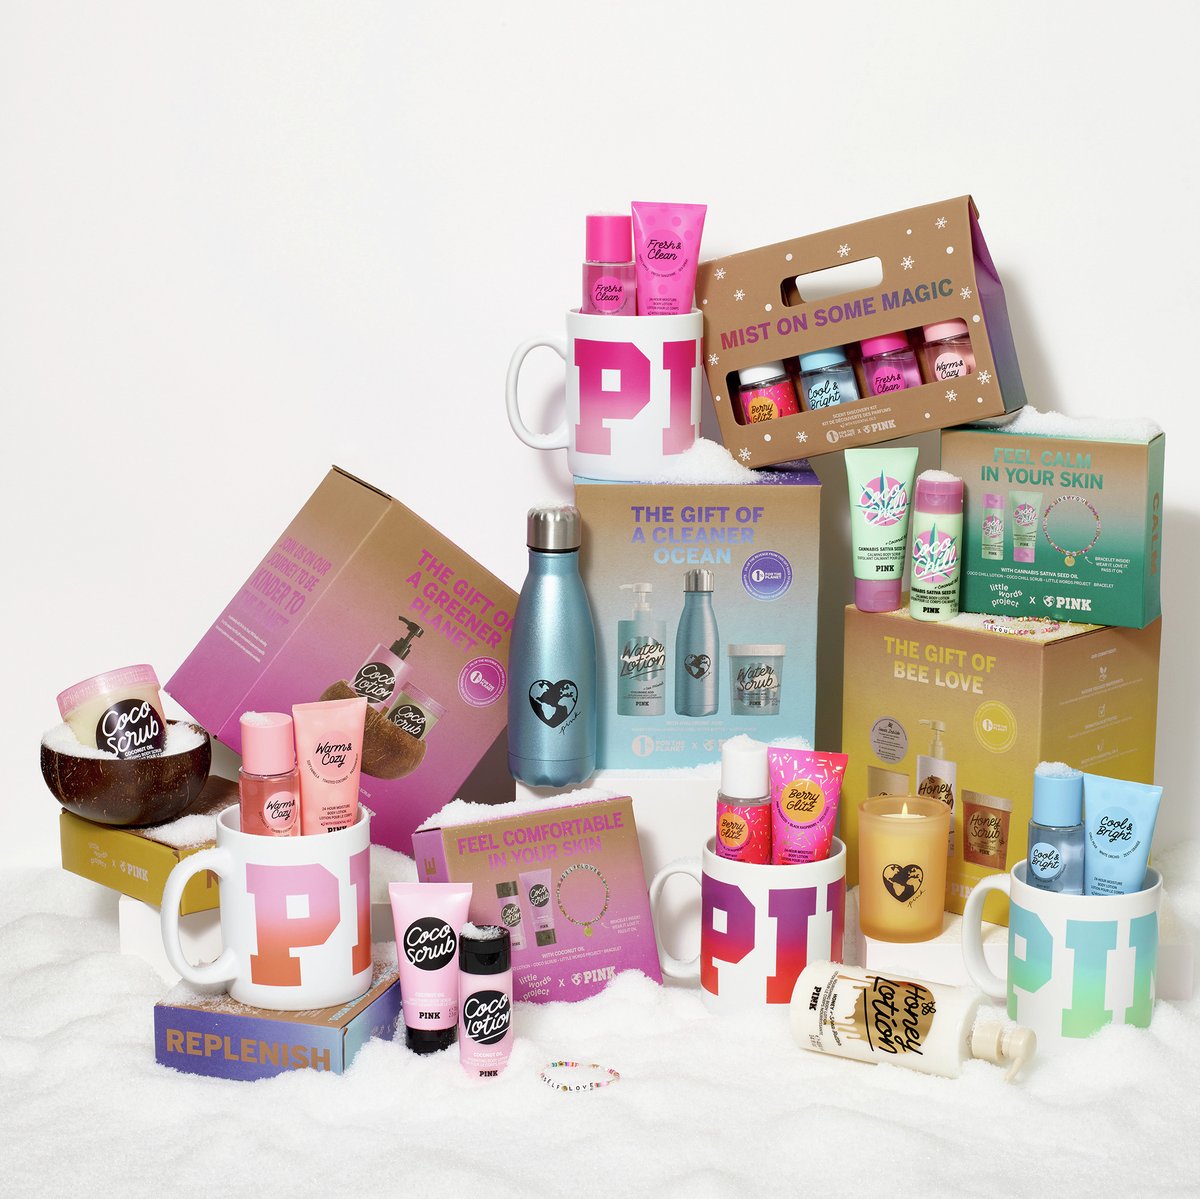 Filled with minis, cozy socks, mugs, and more — #PINKBty gift sets are a must-have! 🧖‍♀️ Score $10 off for a limited time.